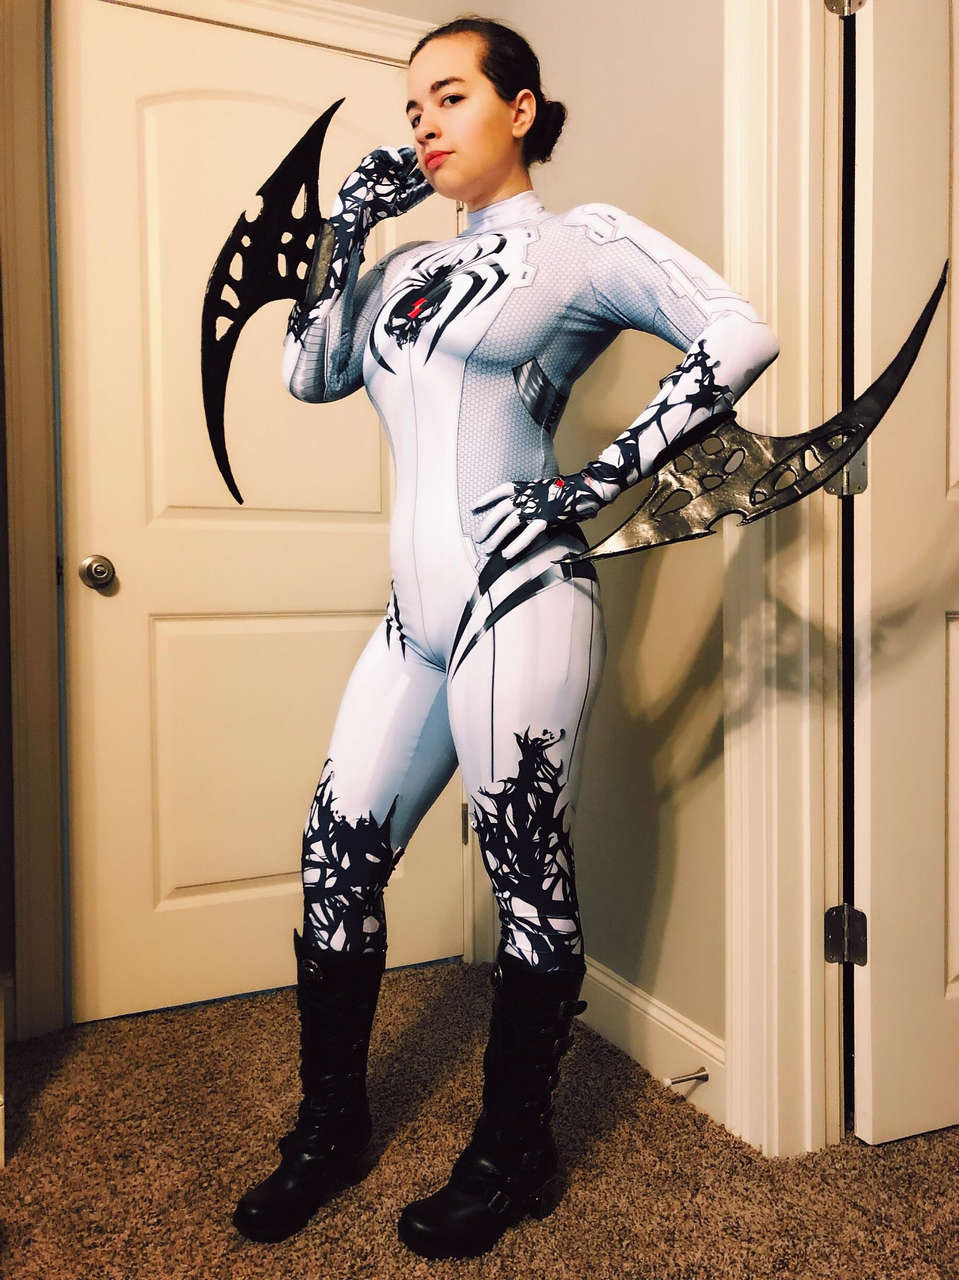 Cosplaysbylo Finally Almost Done With My Whitw Widow Detail